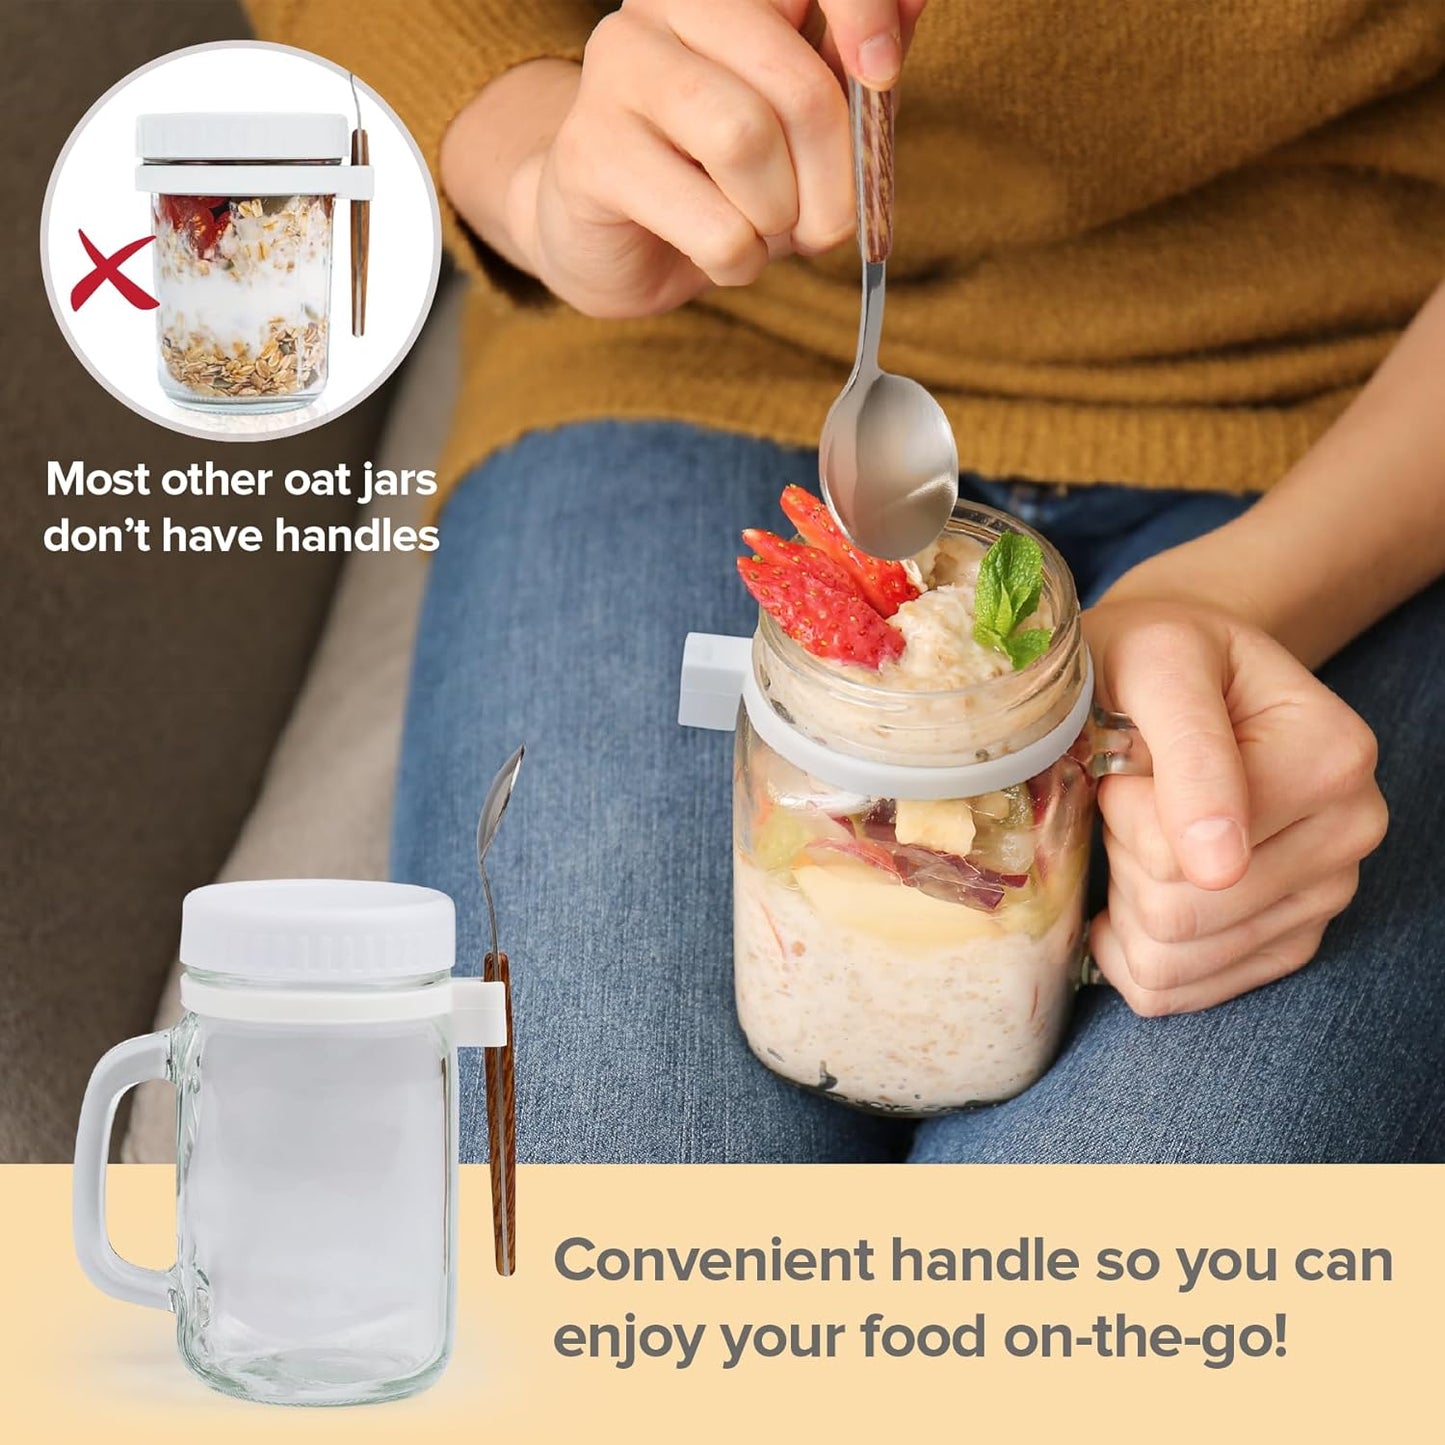 a person holding a spoon over a jar of oatmeal with text: 'Most other oat jars don't have handles Convenient handle so you can enjoy your food on-the-go!'